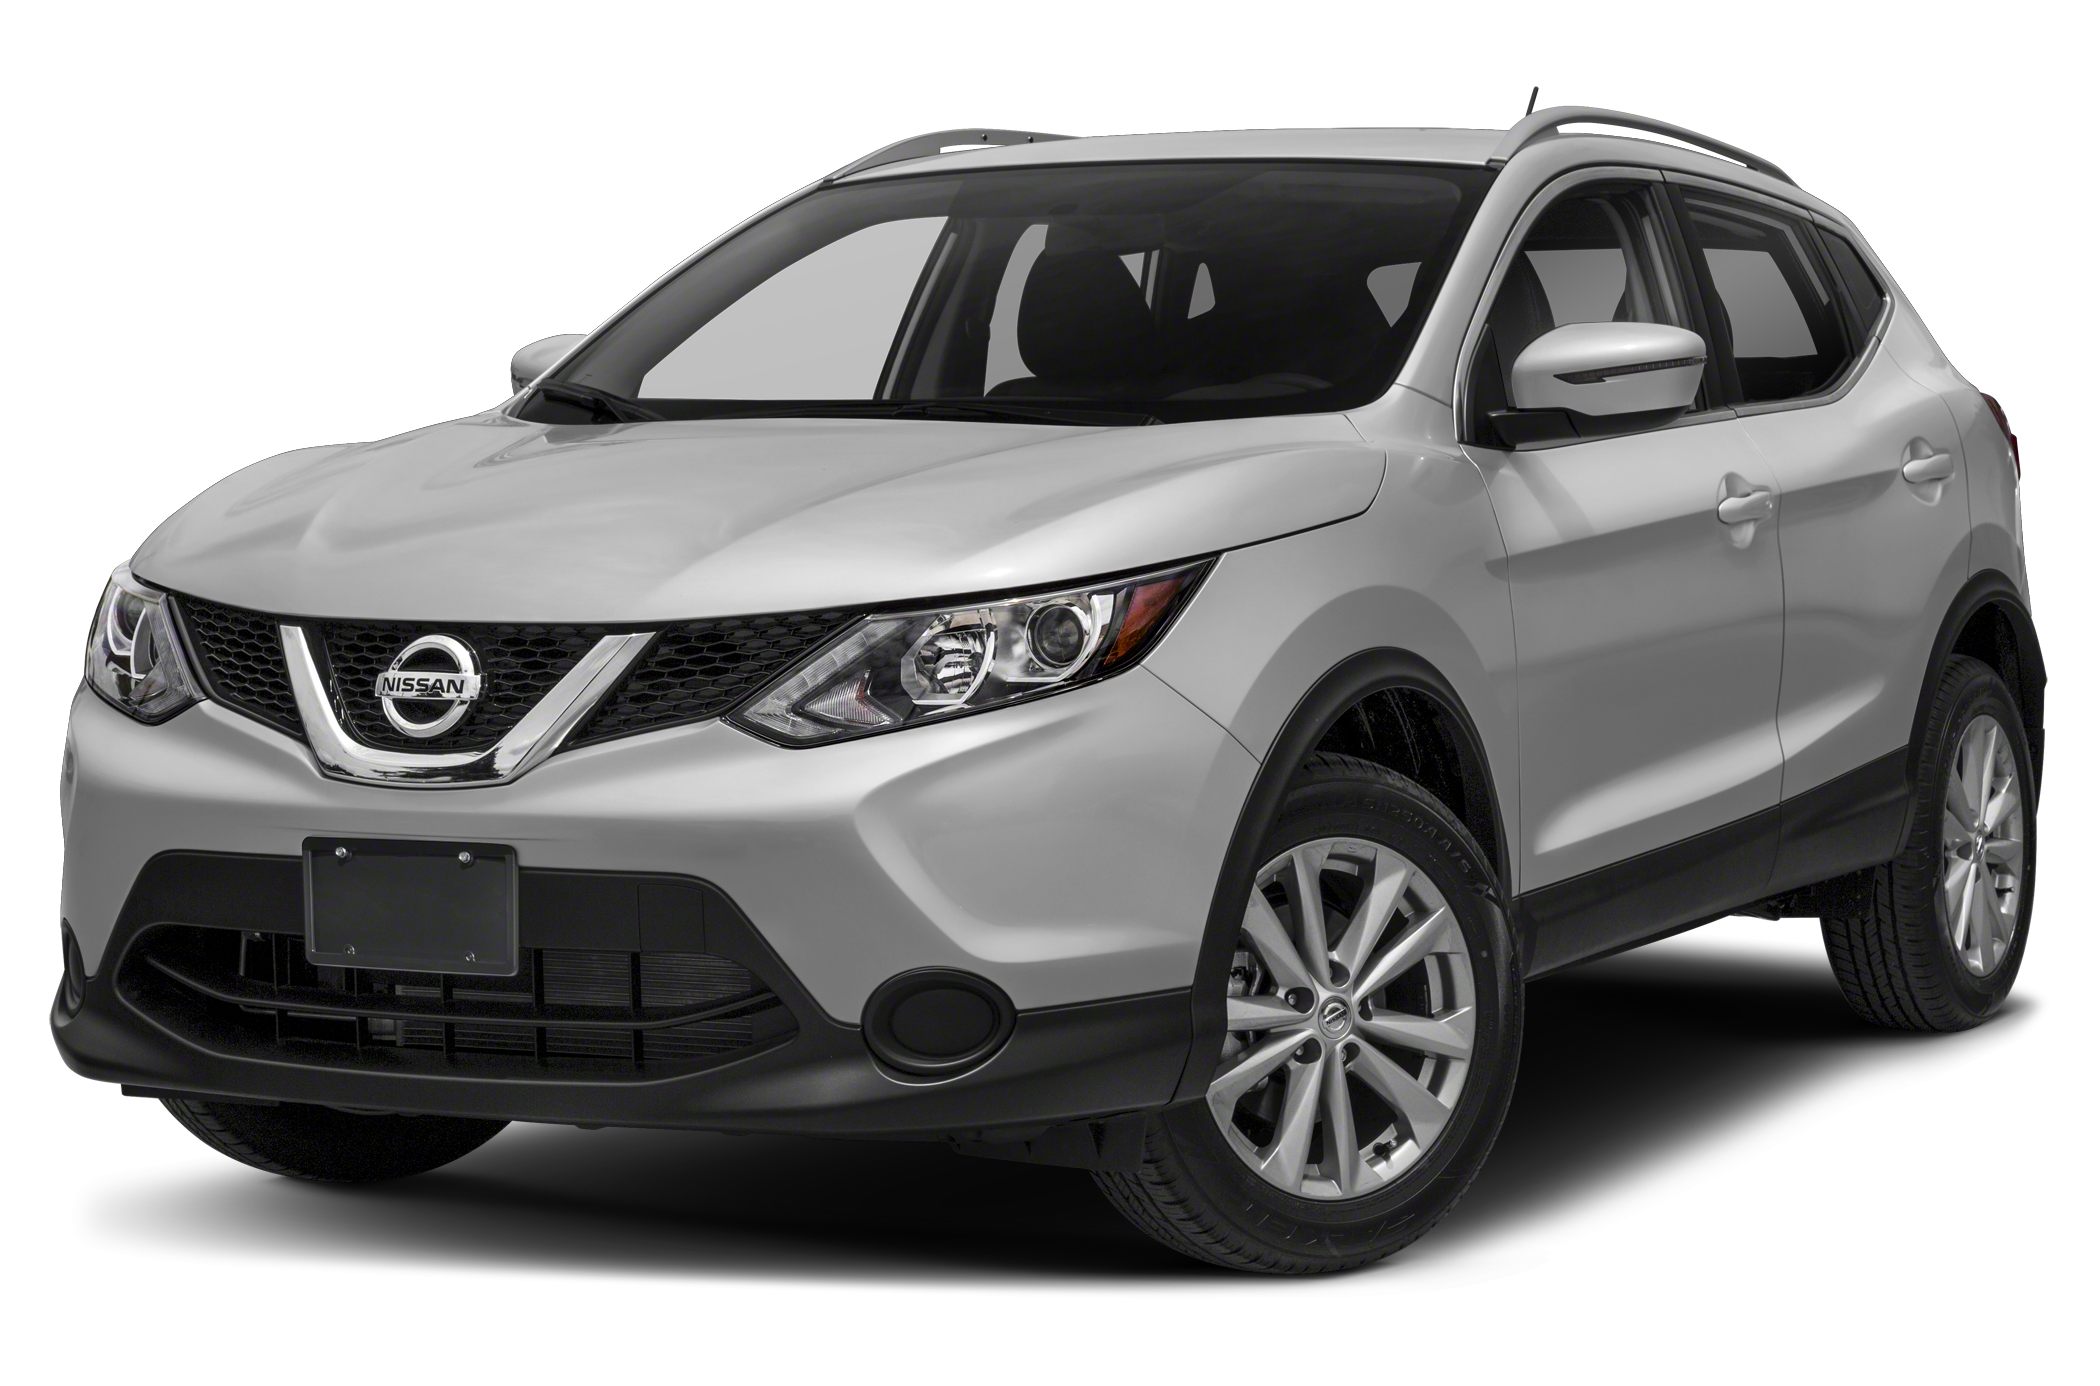 2019 Nissan Rogue Sport Review | Price, specs, features ...